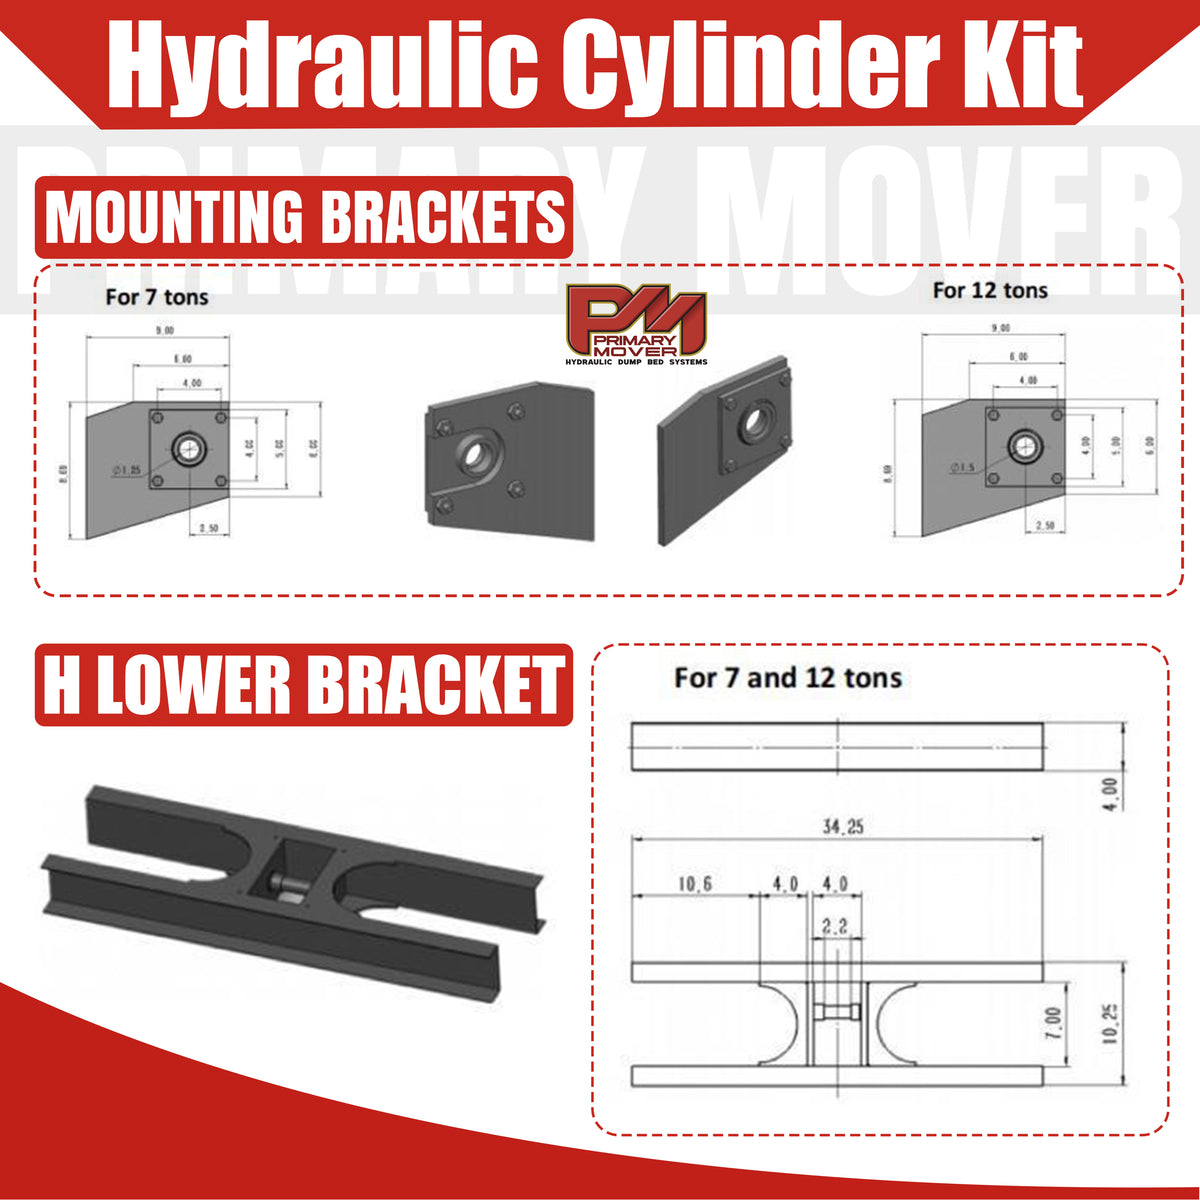 Diagram of the Telescopic Dump Trailer Cylinder Kit - 20 Ton Capacity - 135 Stroke - Fits 12-16' Dump Body, showcasing various hydraulic components and mounting brackets.